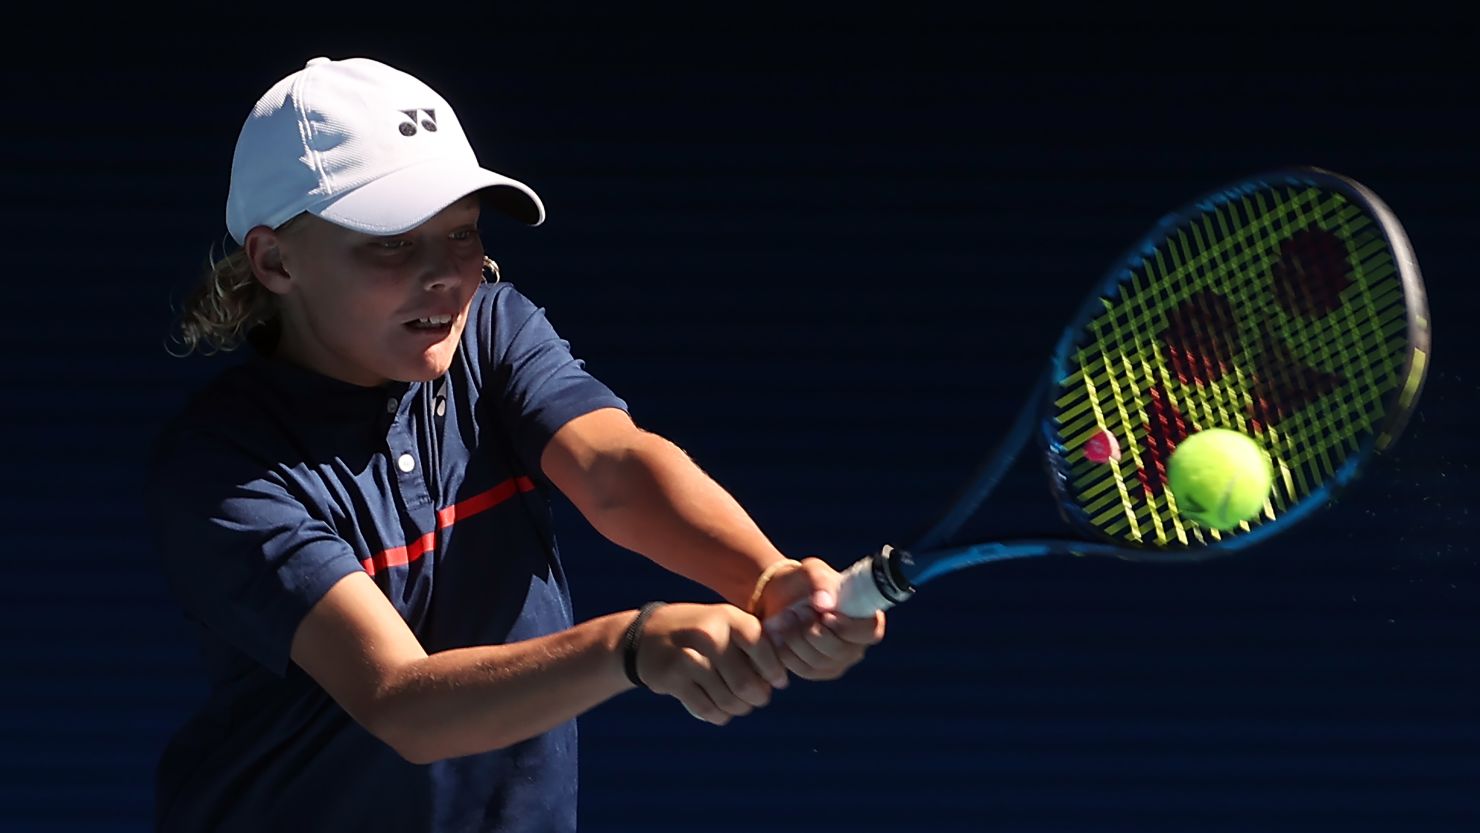 Cruz Hewitt, son of Lleyton Hewitt, during a training session in Melbourne on January 31, 2021, ahead of the Australian Open.